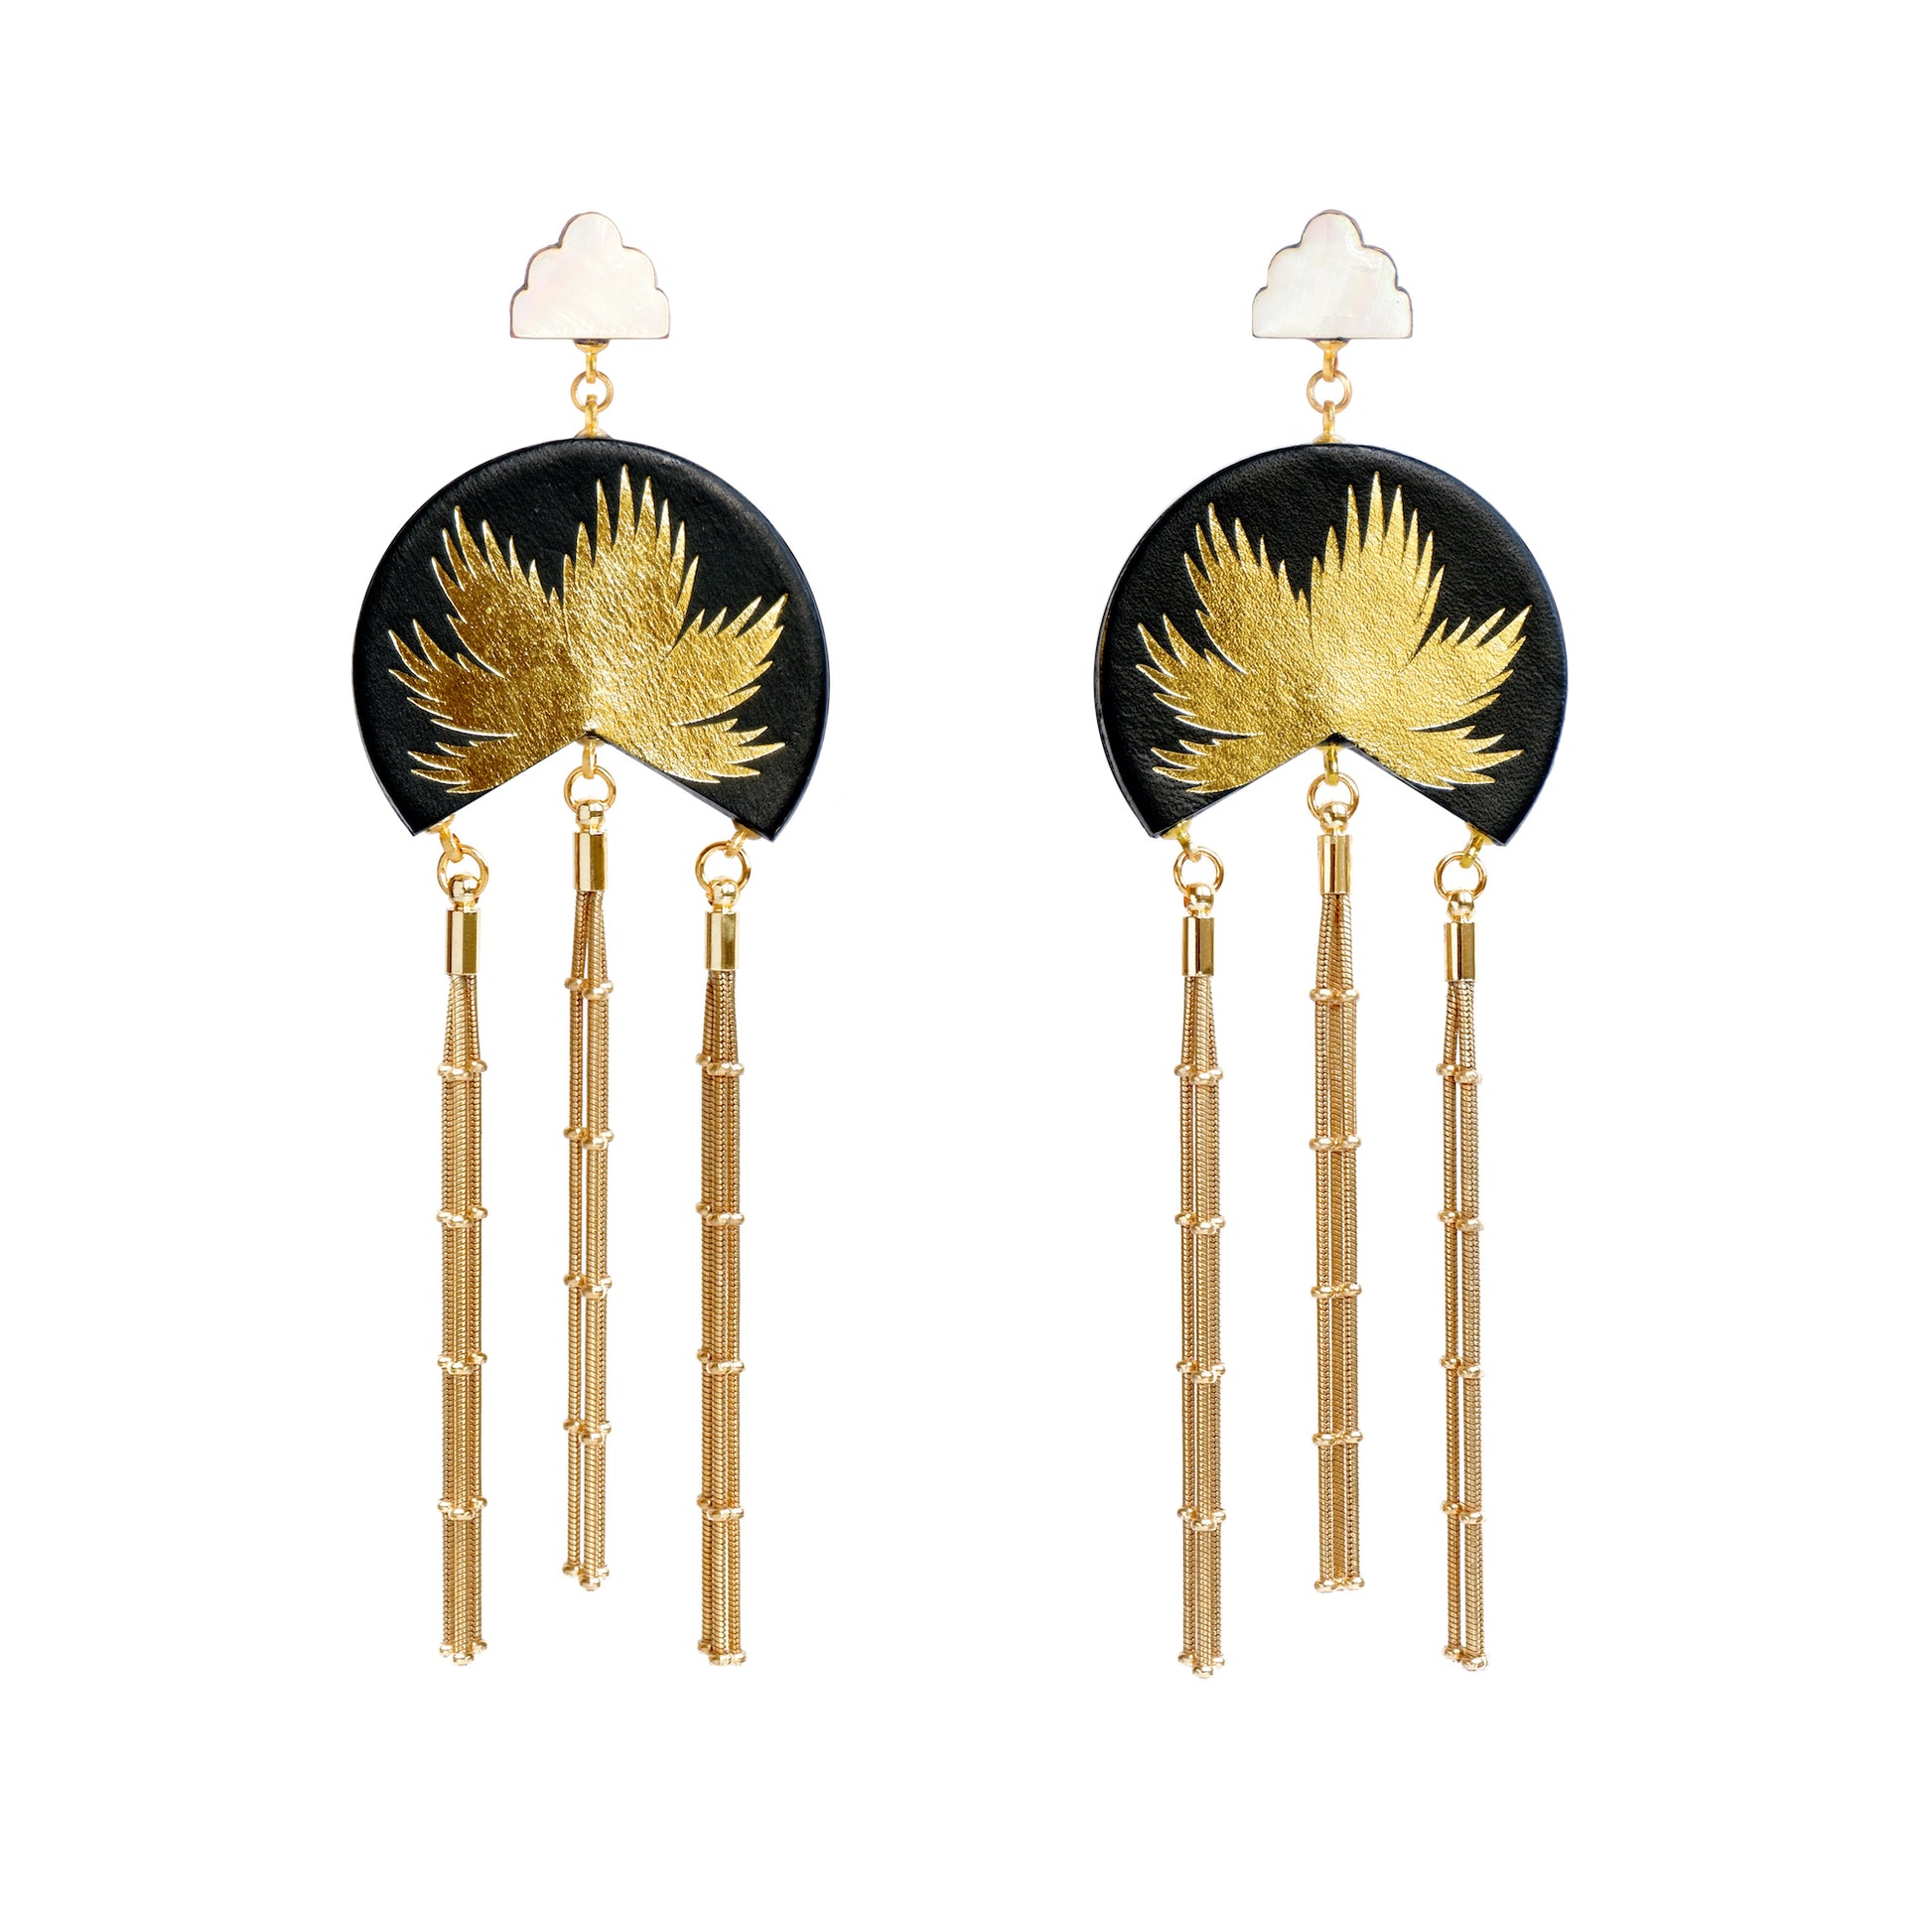 blak leather medallion earrings, with gold palm tree print, gold tassels & mother of pearl cloud shade studs.